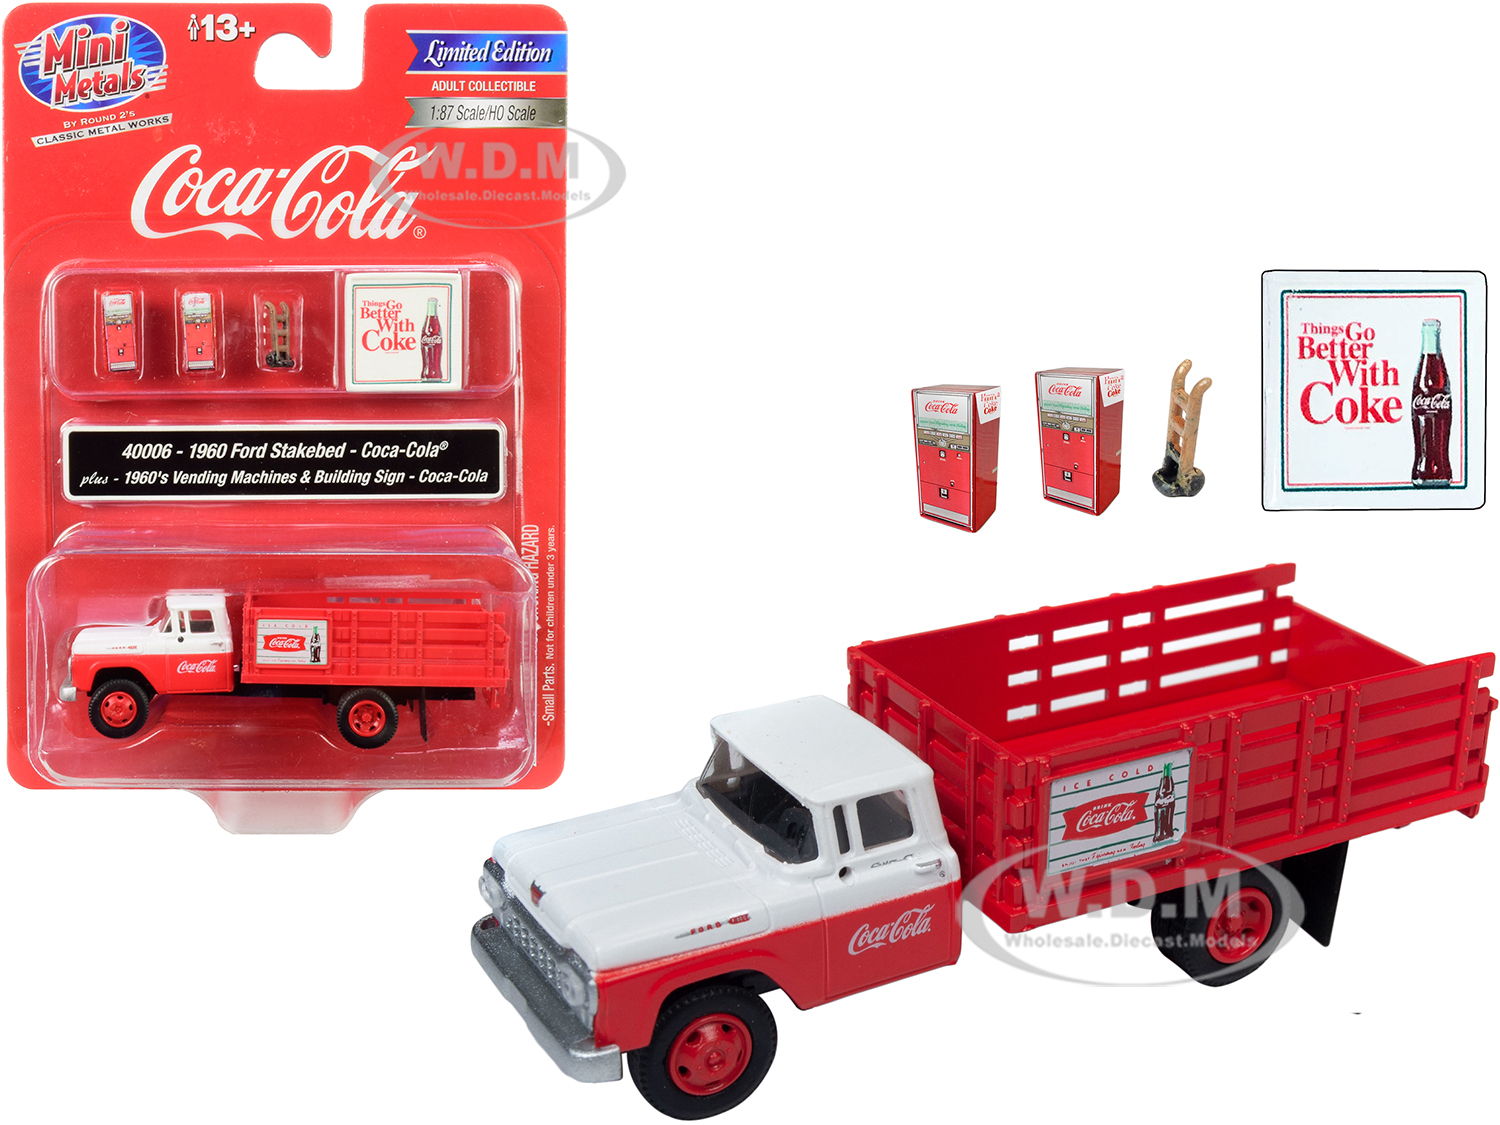 1960 Ford Stake Bed Truck "coca-cola" Red And White With Two 1960s Vending Machines Hand Truck And Building Sign "coca-cola" 1/87 (ho) Scale Model By